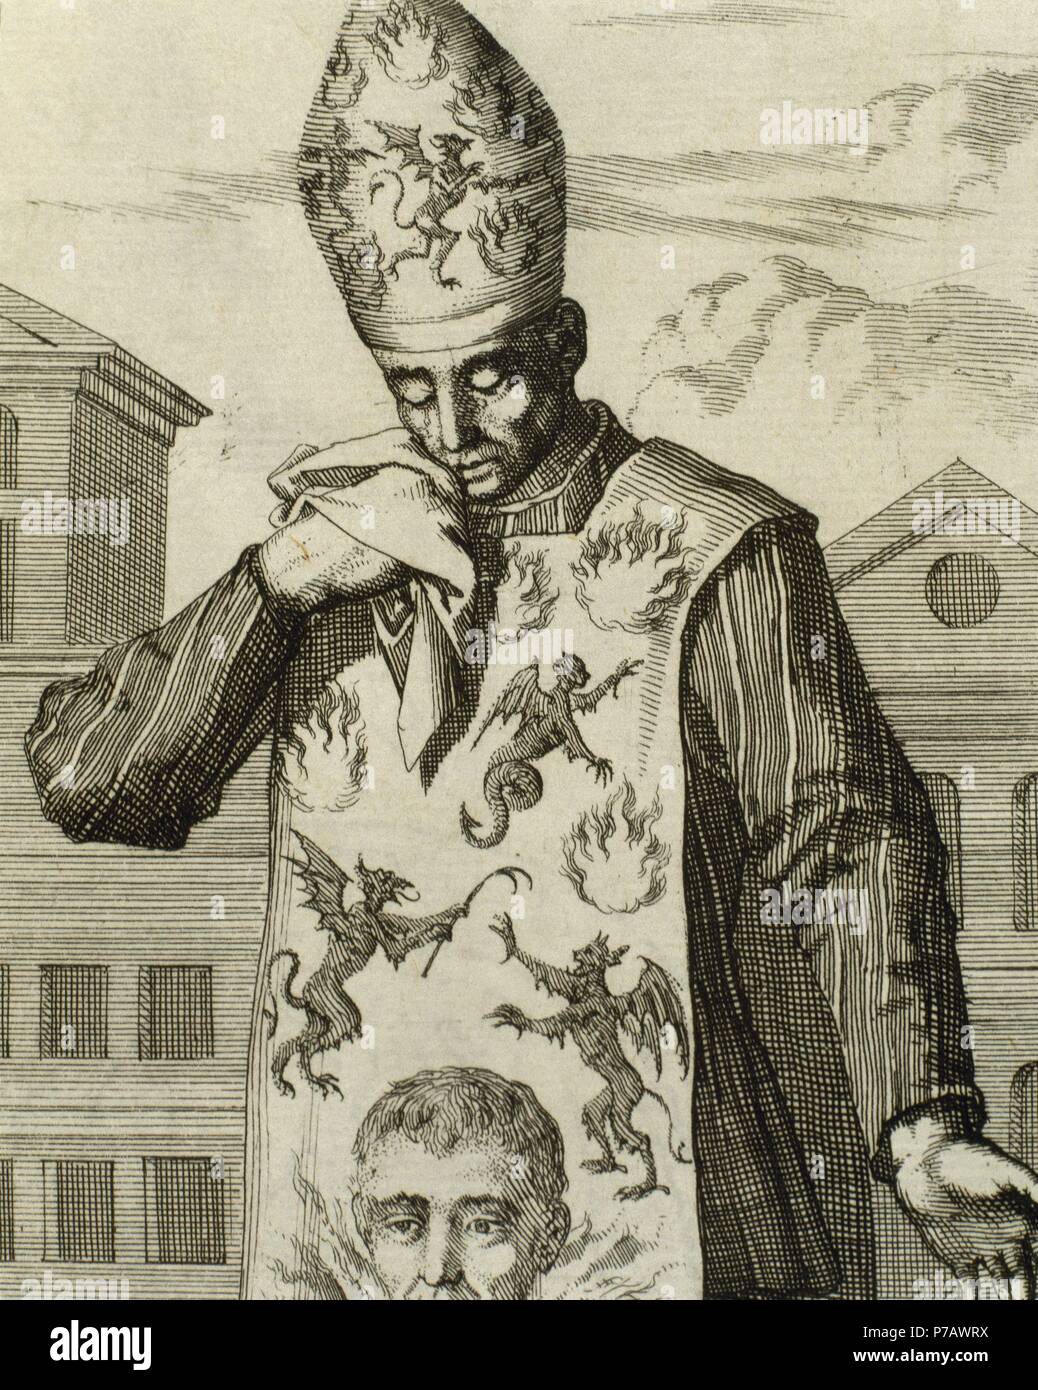 Convicted heretic before the Inquisition wearing a samarra. Engraving. 1692. Stock Photo